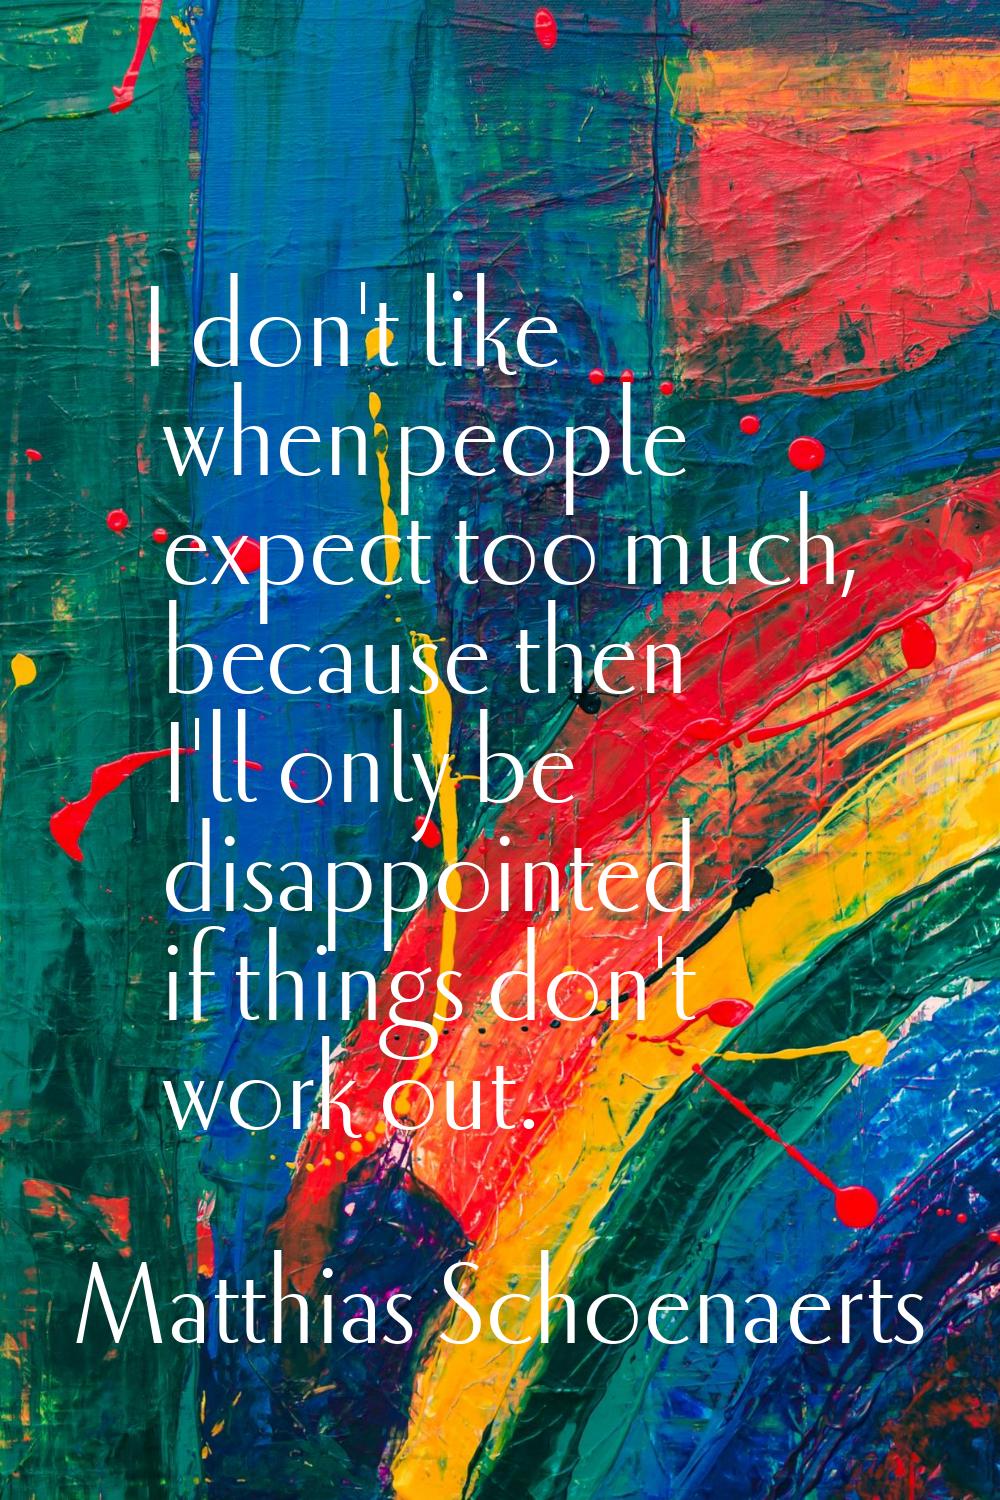 I don't like when people expect too much, because then I'll only be disappointed if things don't wo